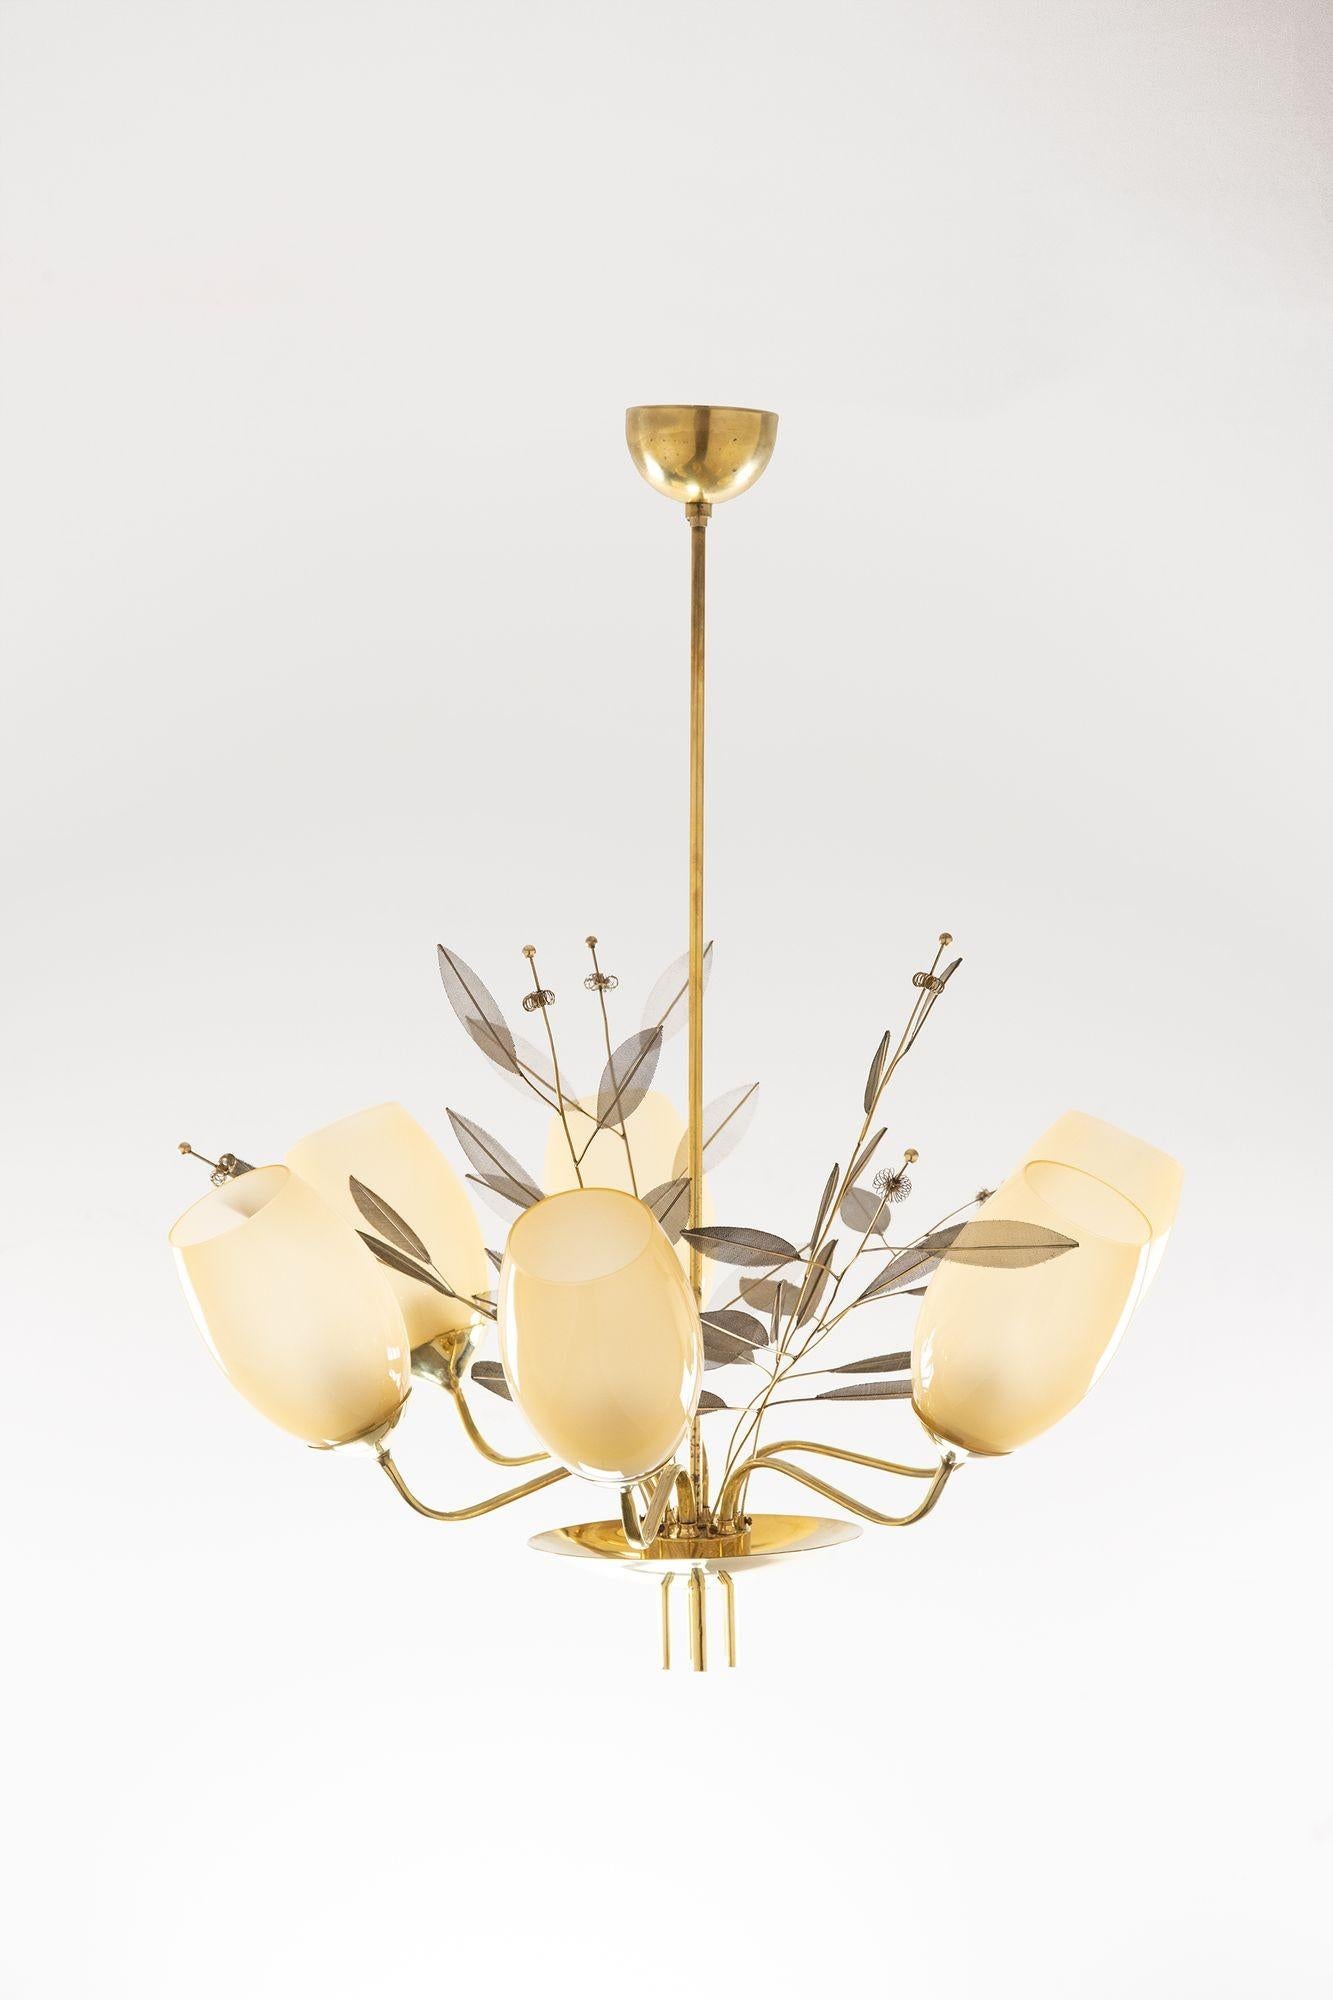 Beautiful six-light chandelier model 9029/6 designed by Paavo Tynell for Taito Oy/Idman c. 1950 Finland. The chandelier has been recently polished constructed of brass and has six almond color glass shades.